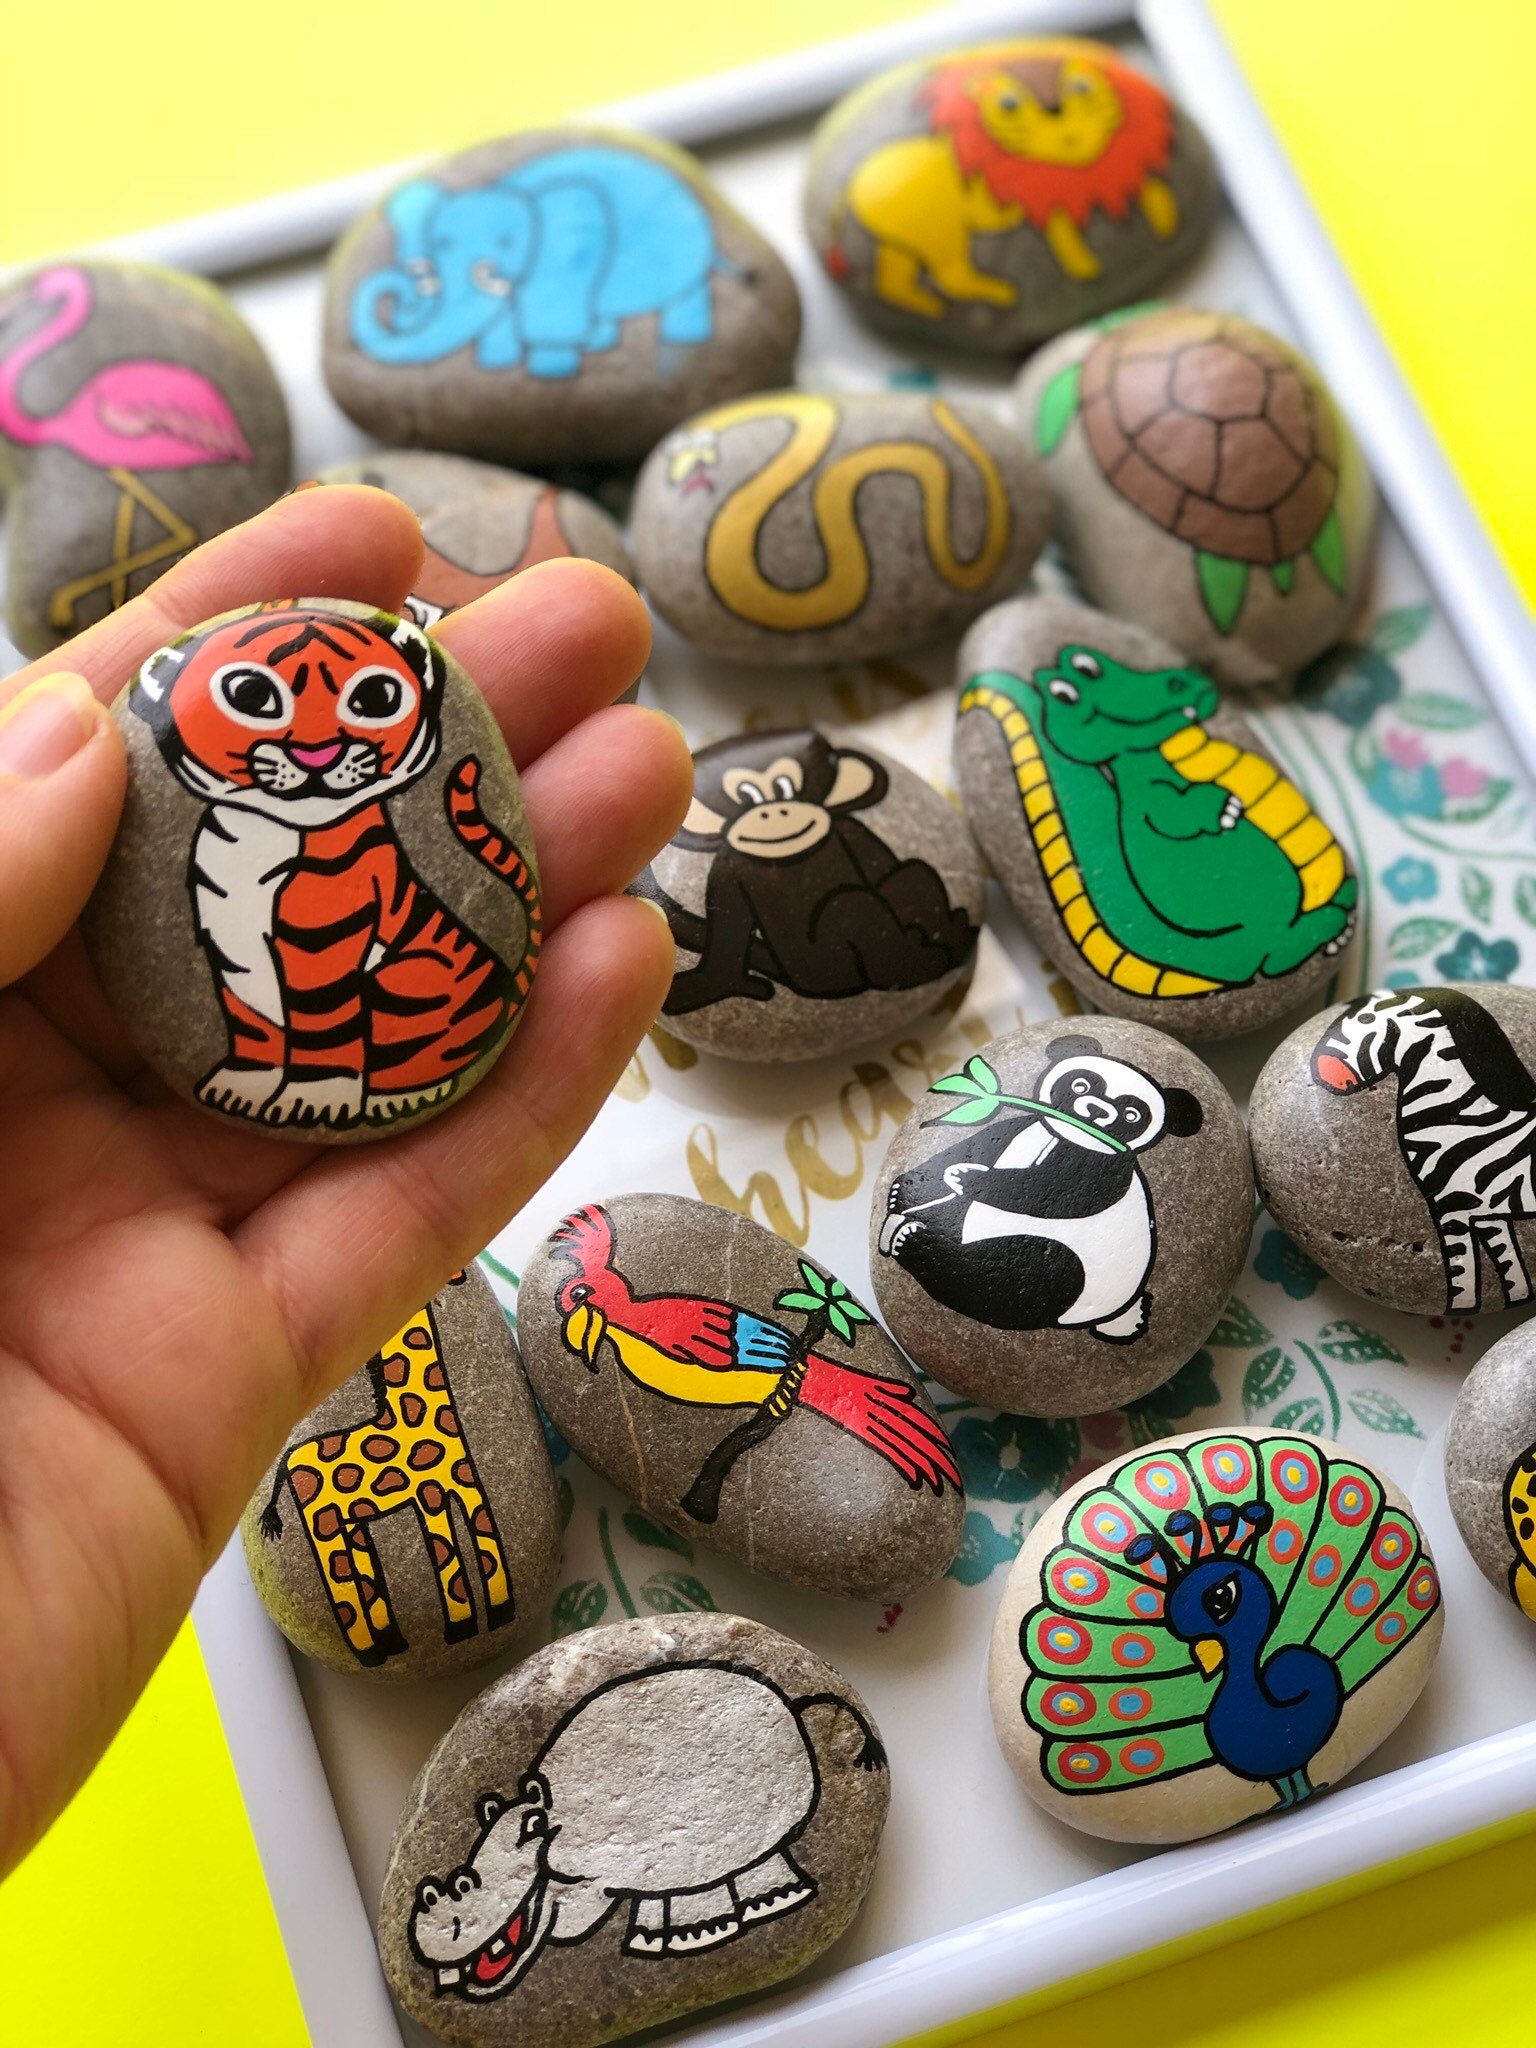 Paint a stone animal - a nature play activity to try at home or school